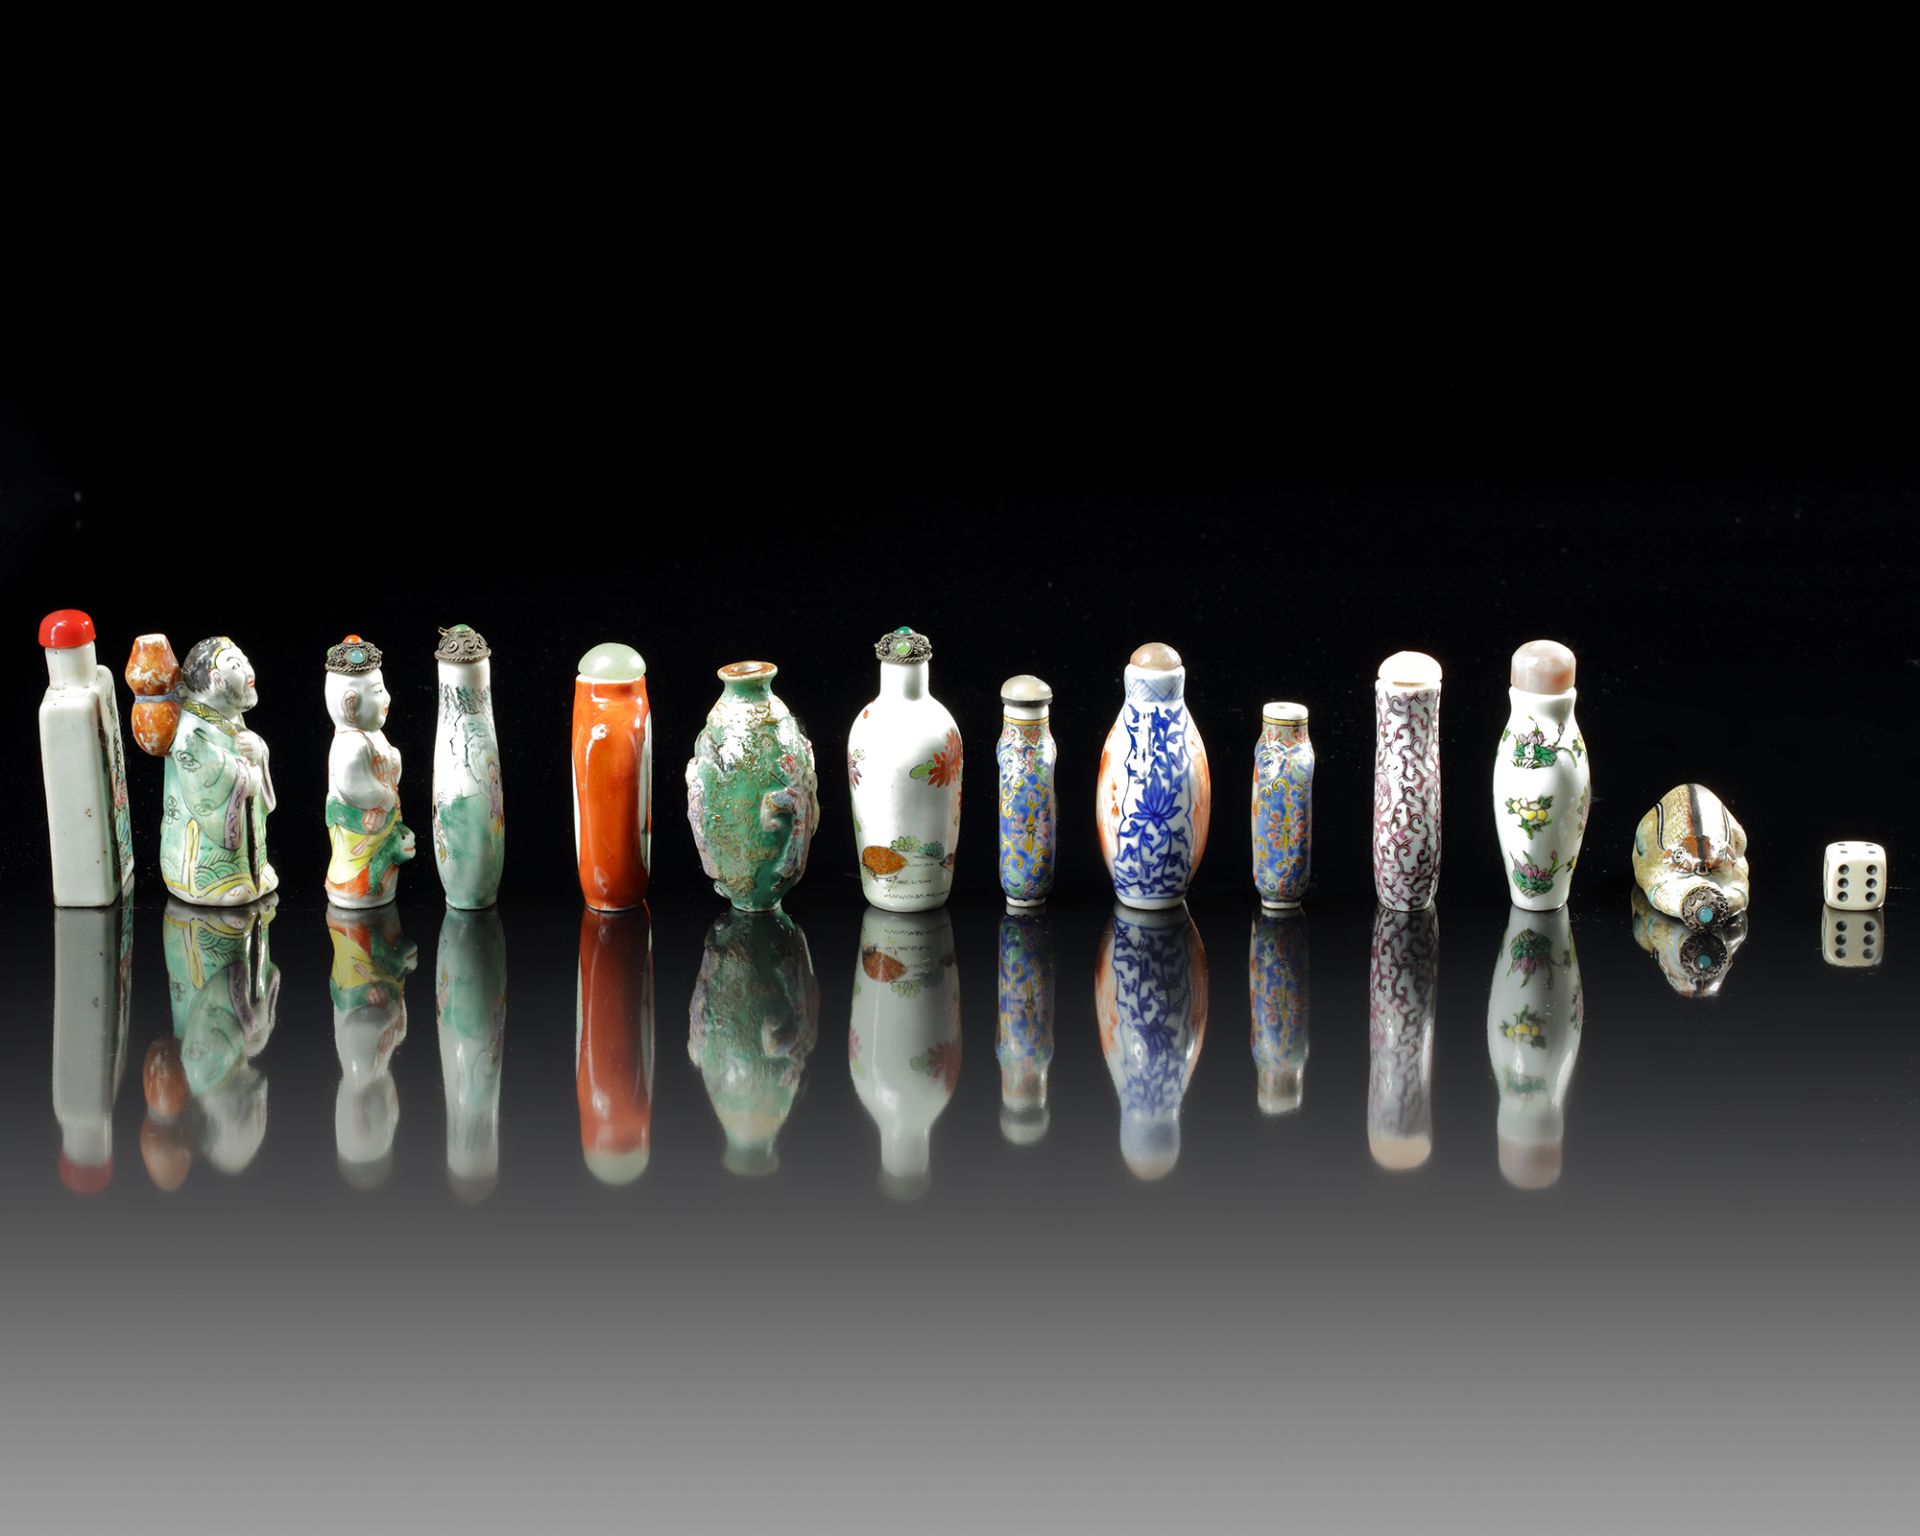 A GROUP OF THIRTEEN CHINESE FAMILLE ROSE SNUFF BOTTLES, 19TH/20TH CENTURY - Image 2 of 3